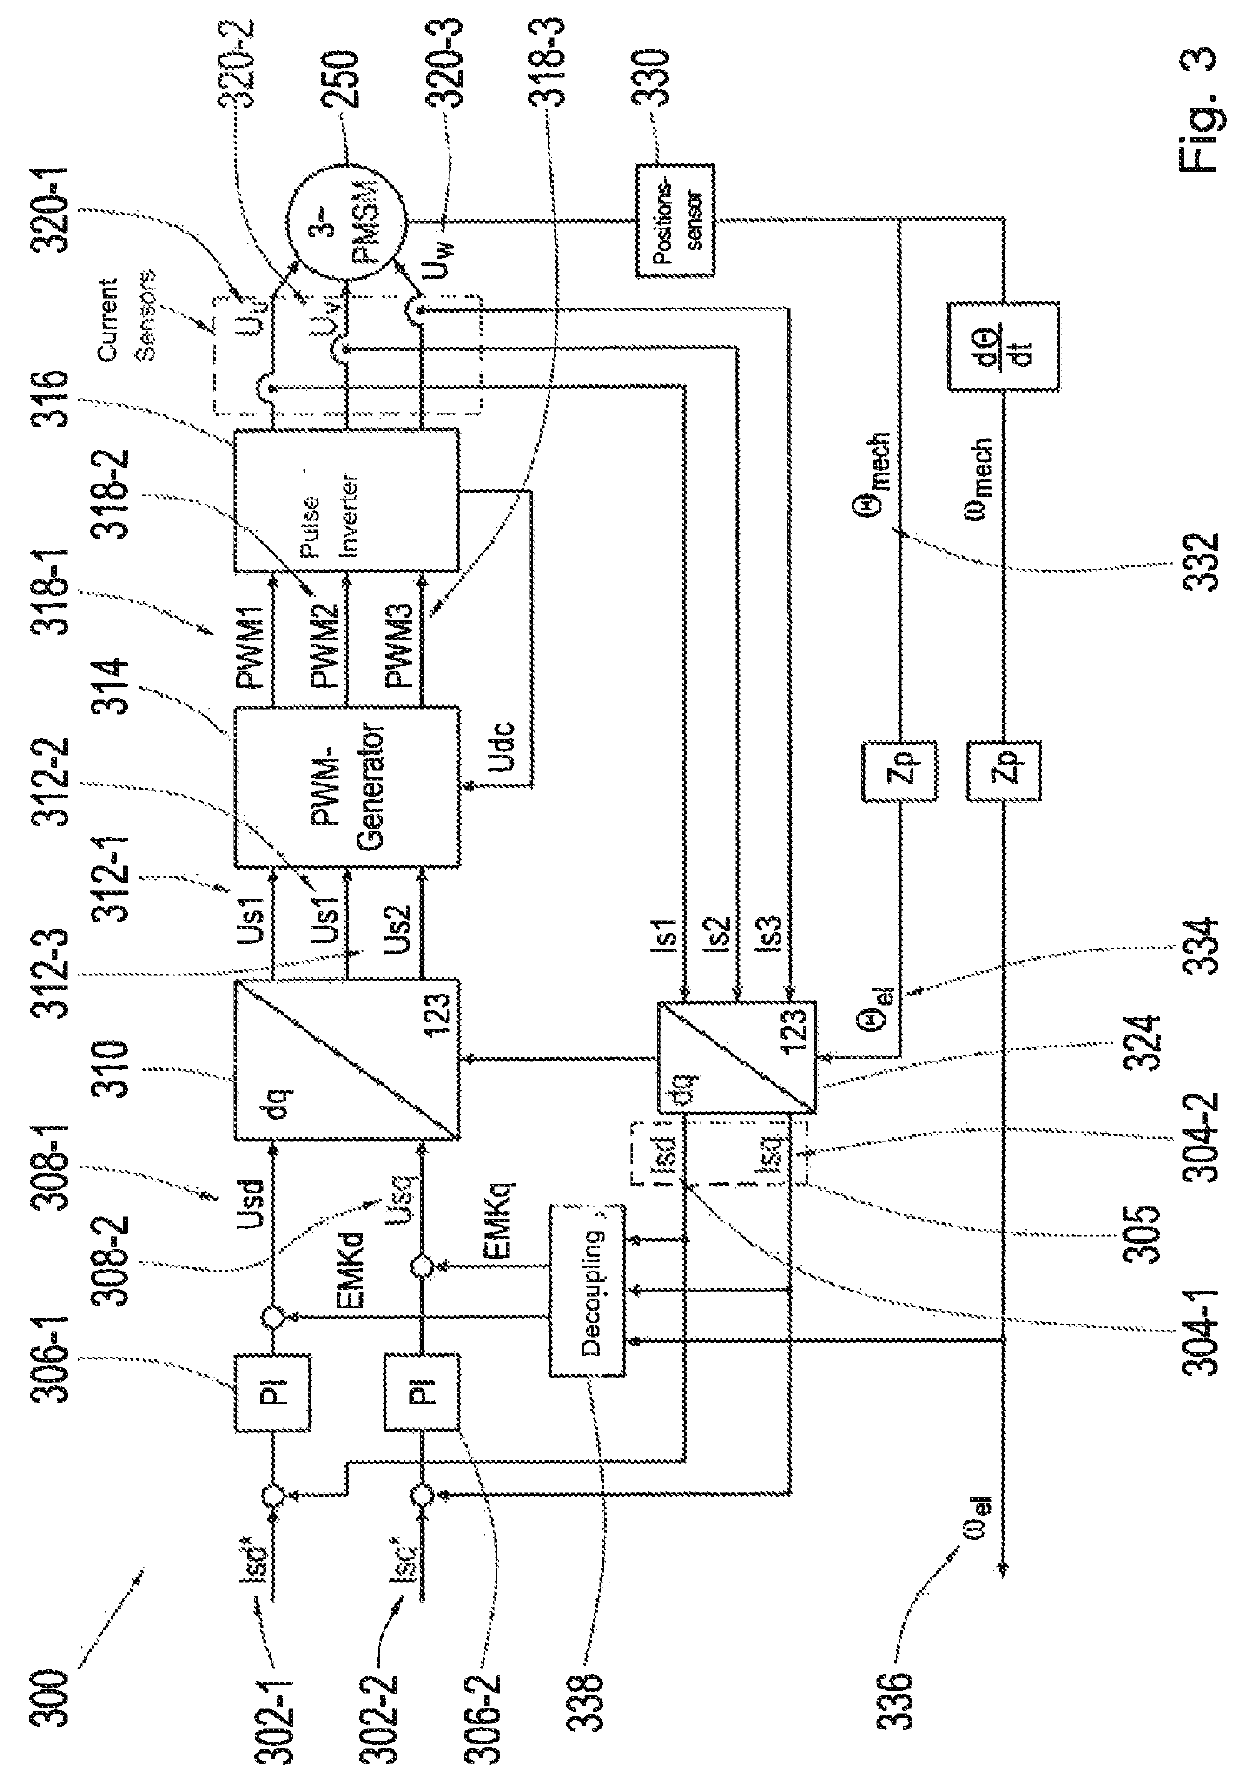 Processor, device, method and computer program to control an emergency operation of a multi-phase rotating field machine during interruption of a first phase current of a first phase of the rotating field machine